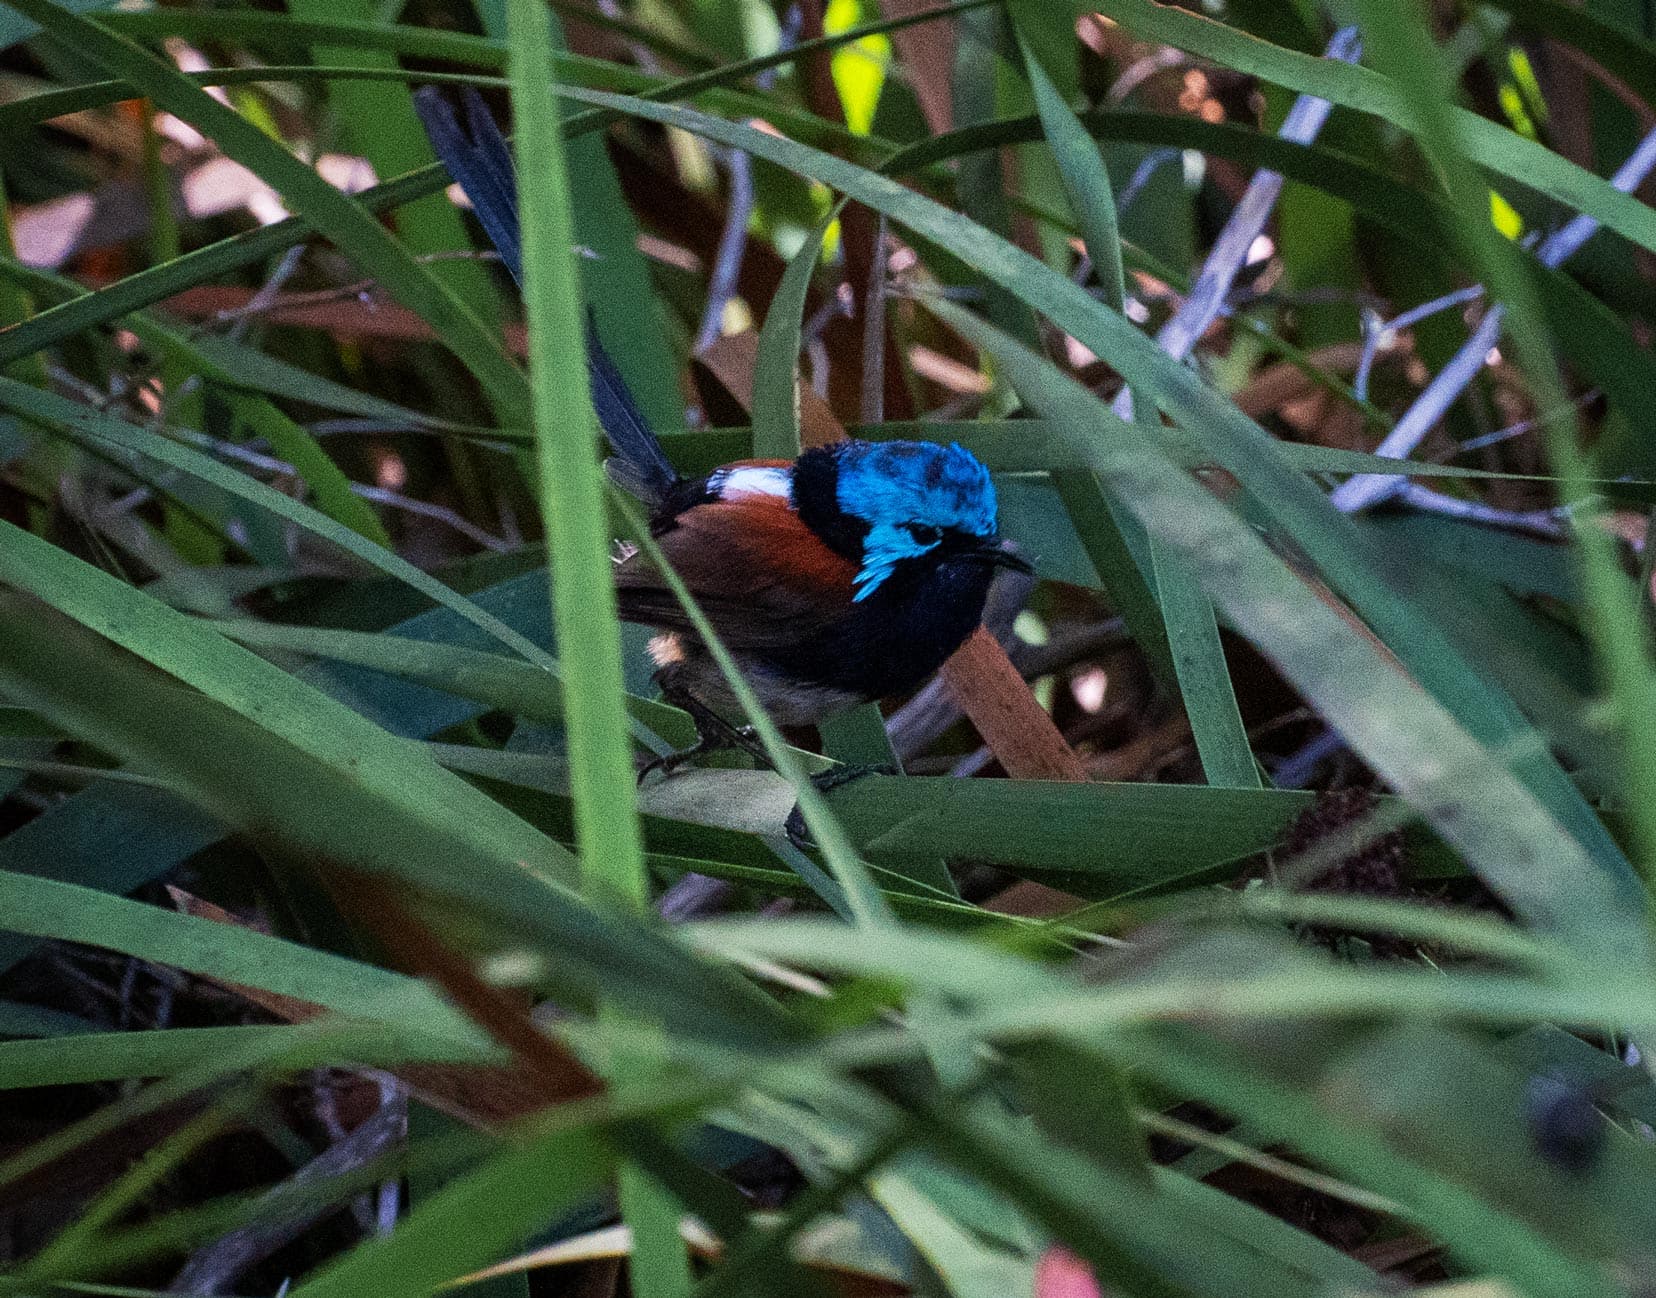 Blue and brown small bird in the green sword grass